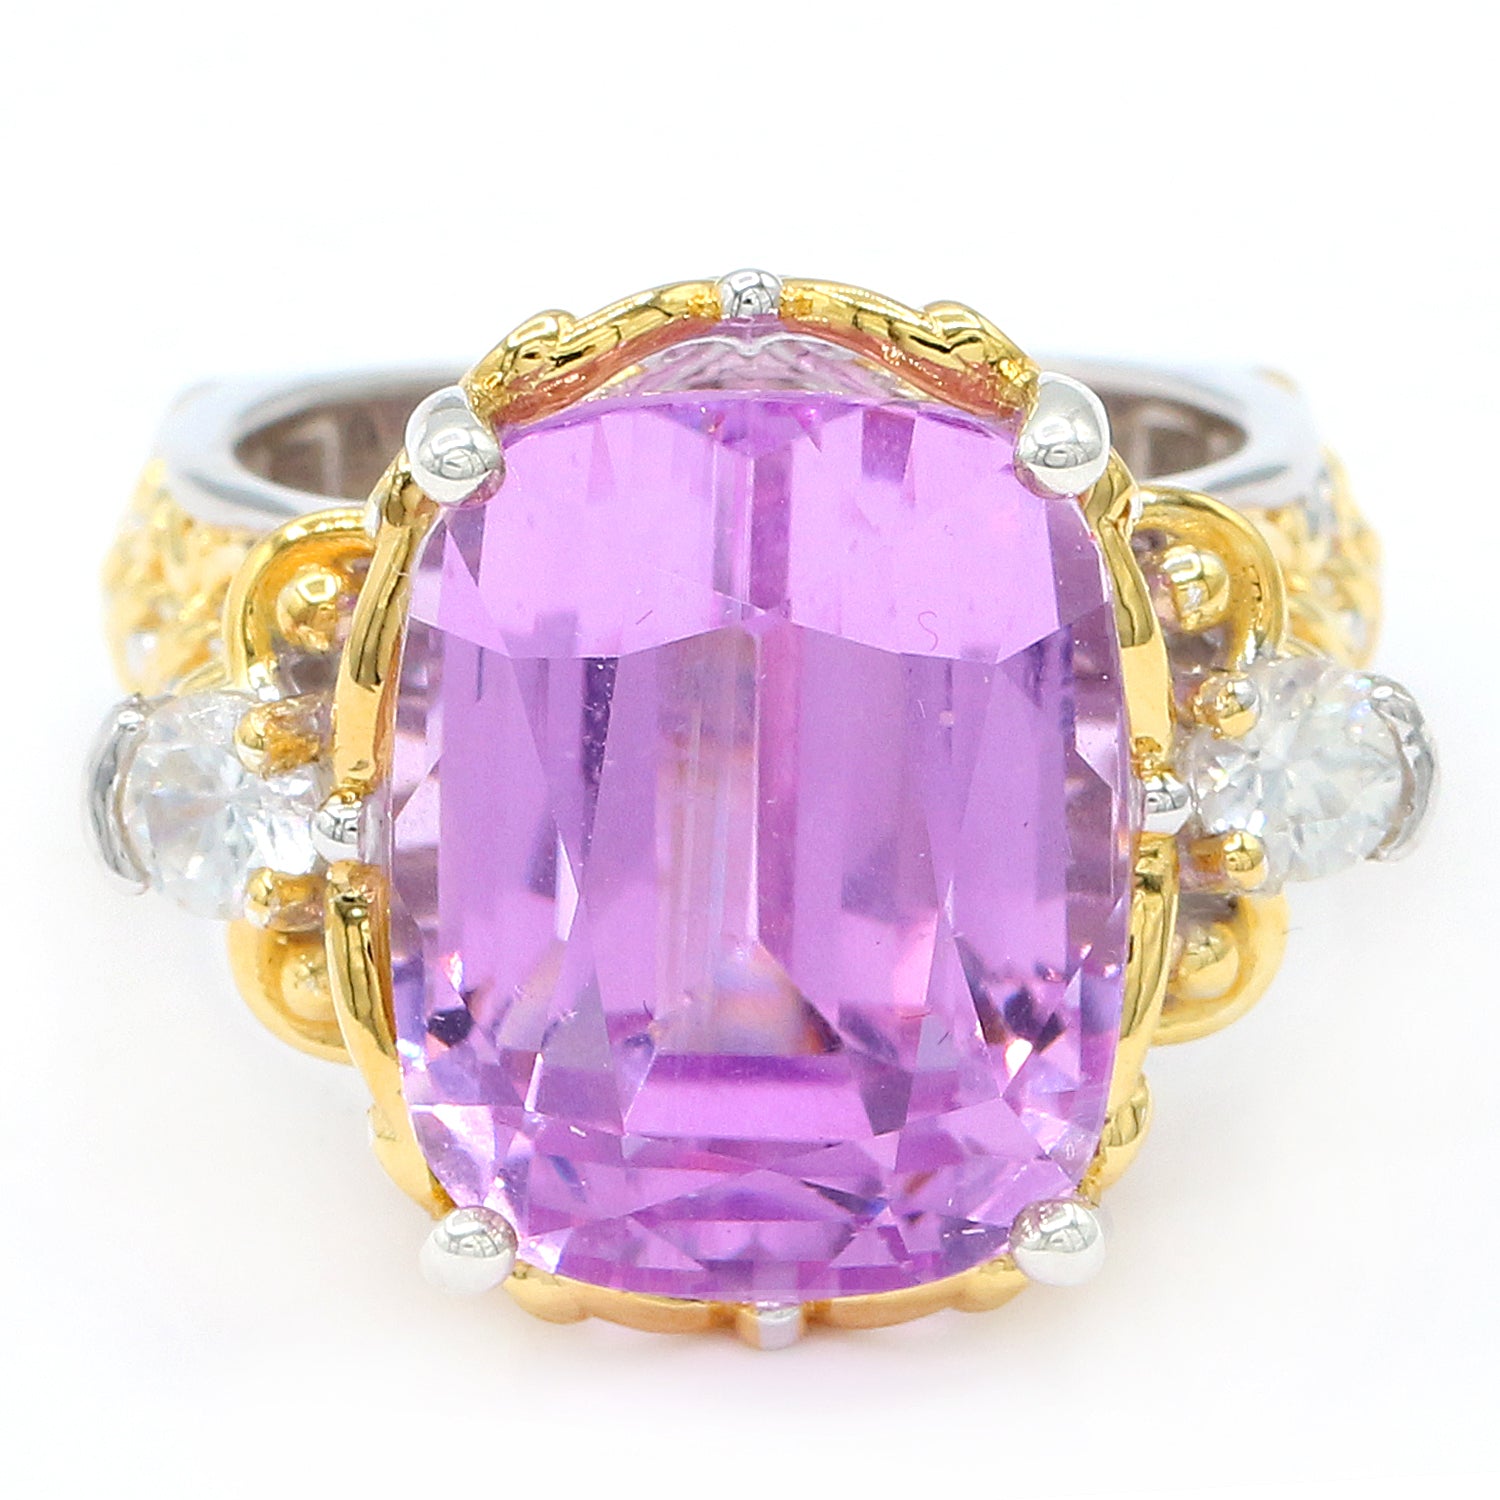 Limited Edition Gems en Vogue Luxe, One-of-a-Kind 23.39ctw Kunzite & White Zircon Ring